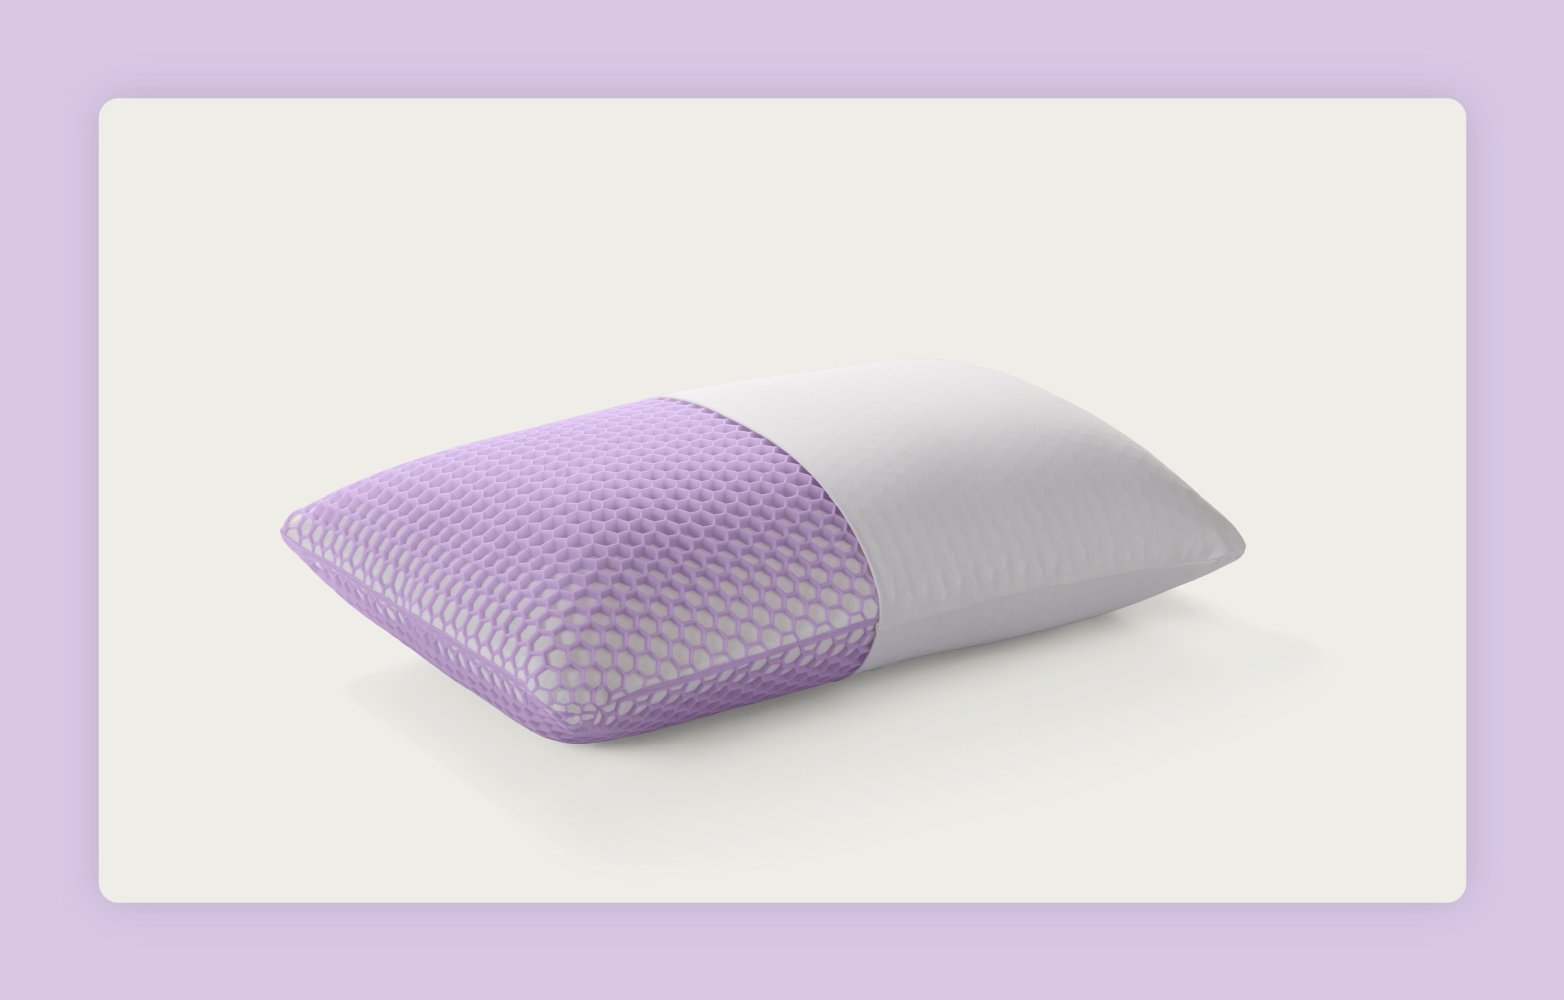 The Purple Harmony™ Pillow showing the exposed honeycomb GelFlex® Grid.